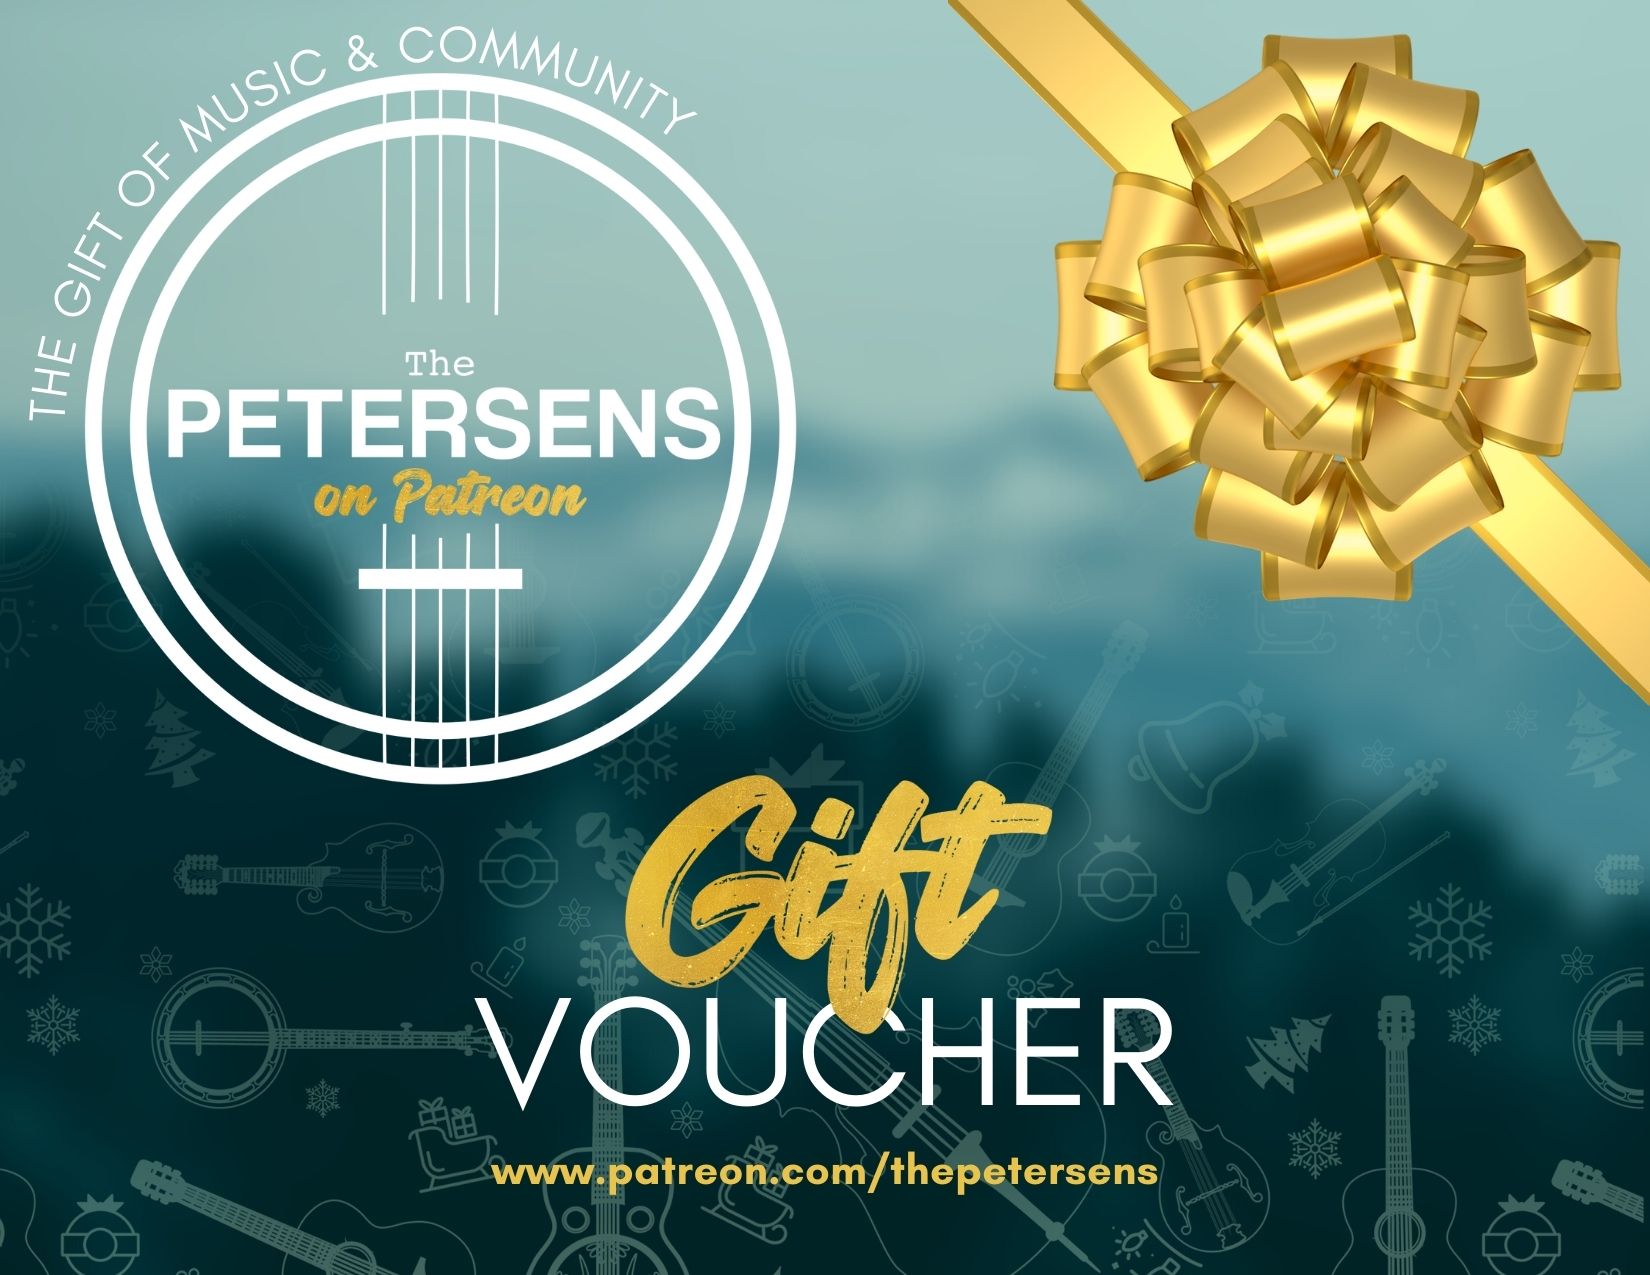 The perfect gift for a fan of The Petersens